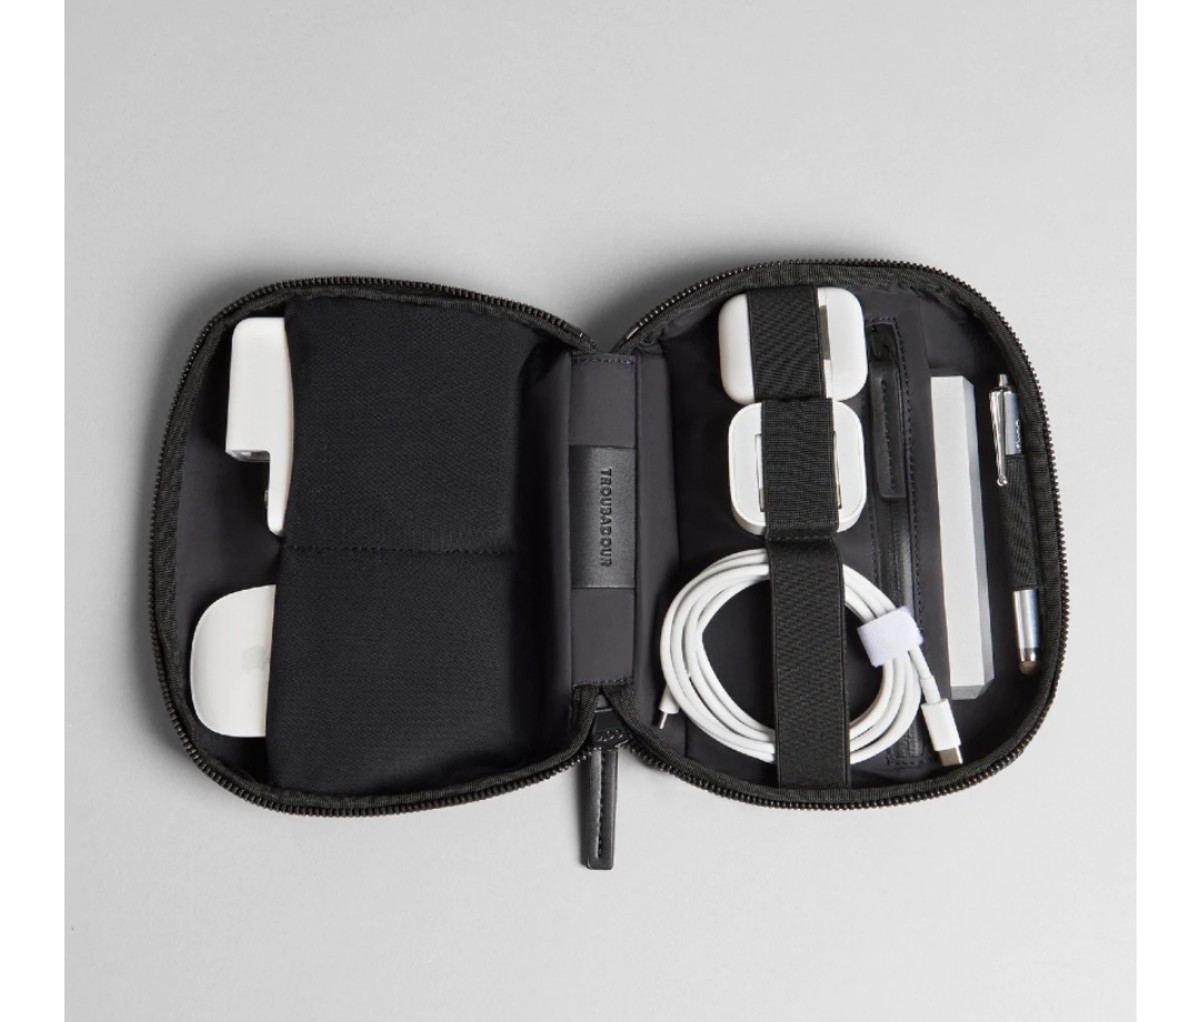 Small black bag open and filled with cables and chargers on an off-white background.